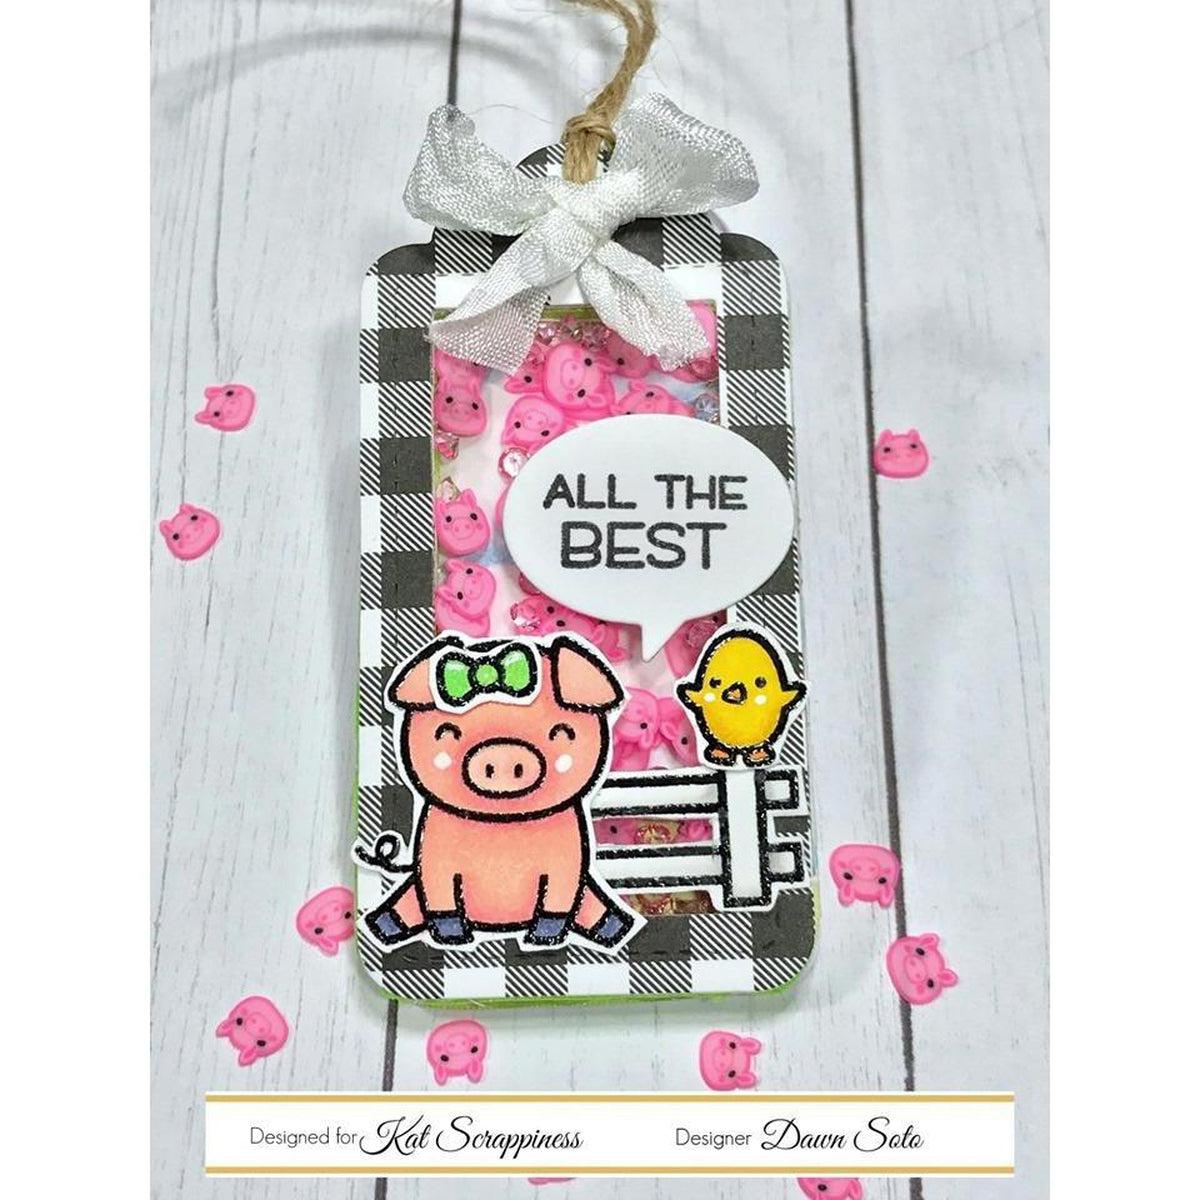 Little Piggy Sprinkles by Kat Scrappiness - Kat Scrappiness